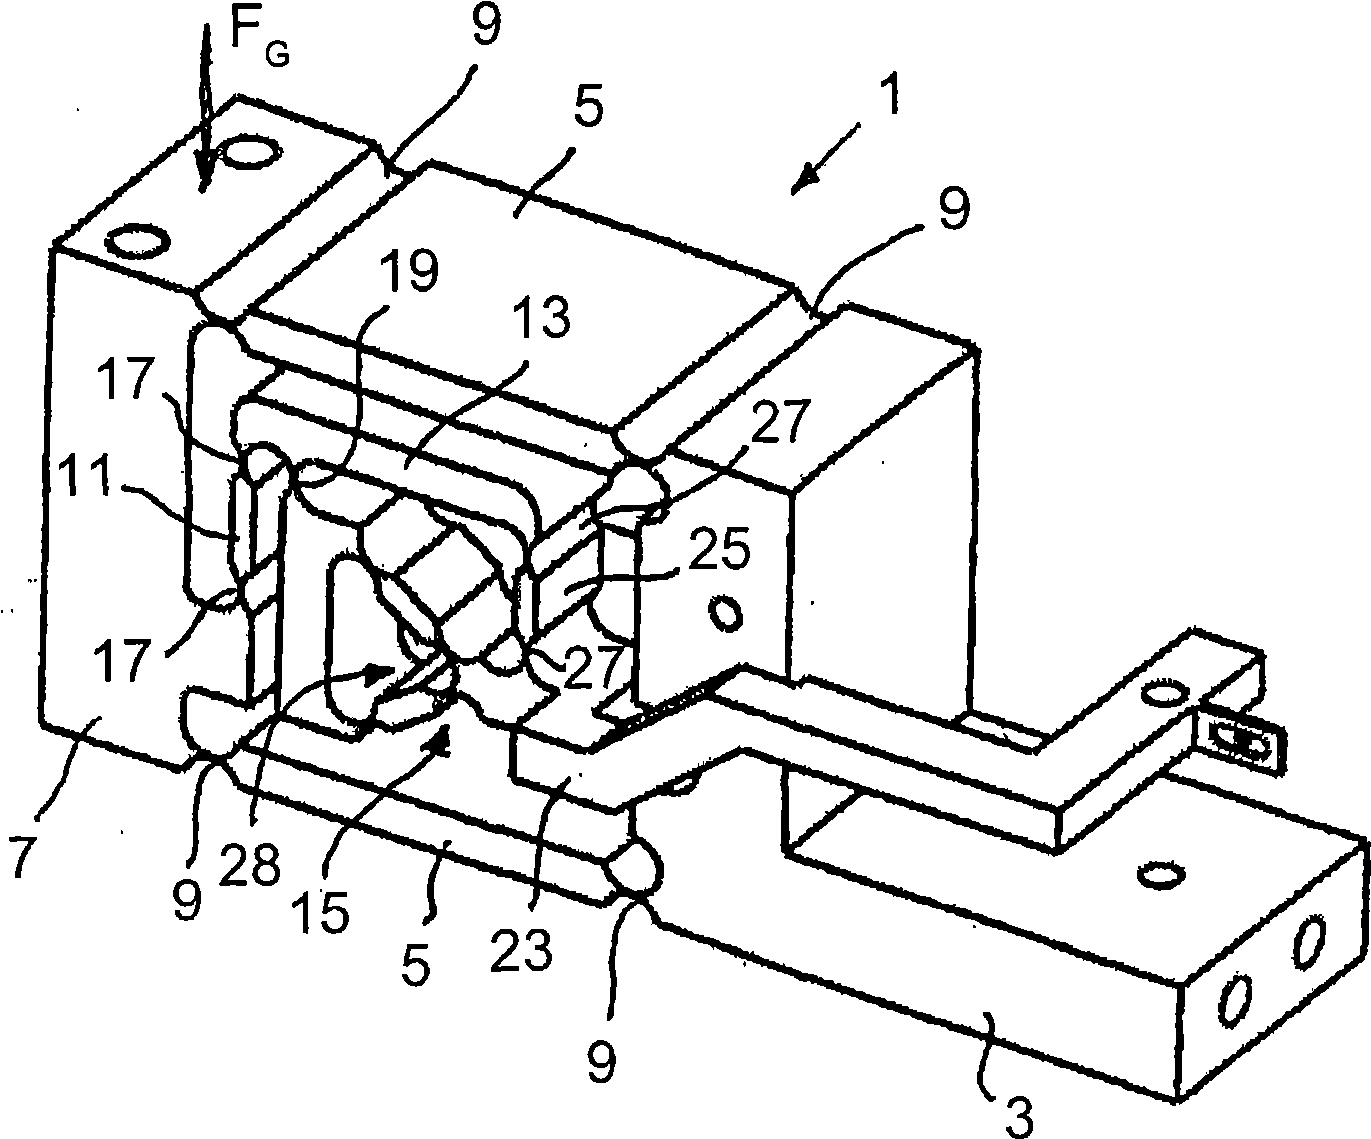 Crank mechanism in particular for a weighing sensor on a balance working on the electromagnetic force compensation principle